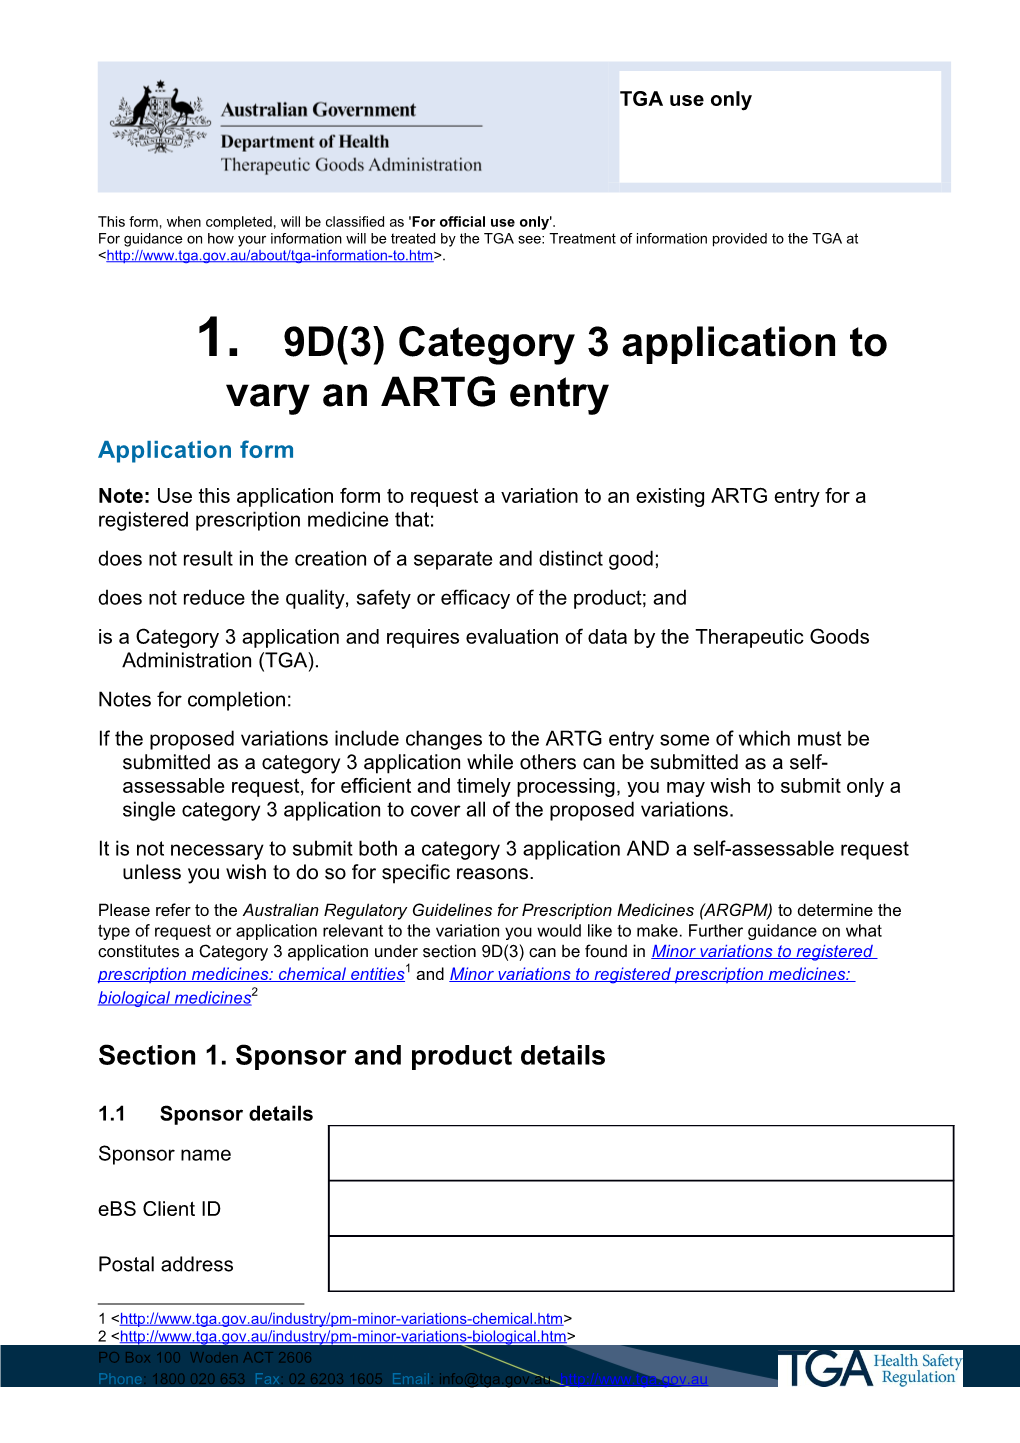 9D(3) Category 3 Application to Vary an ARTG Entry